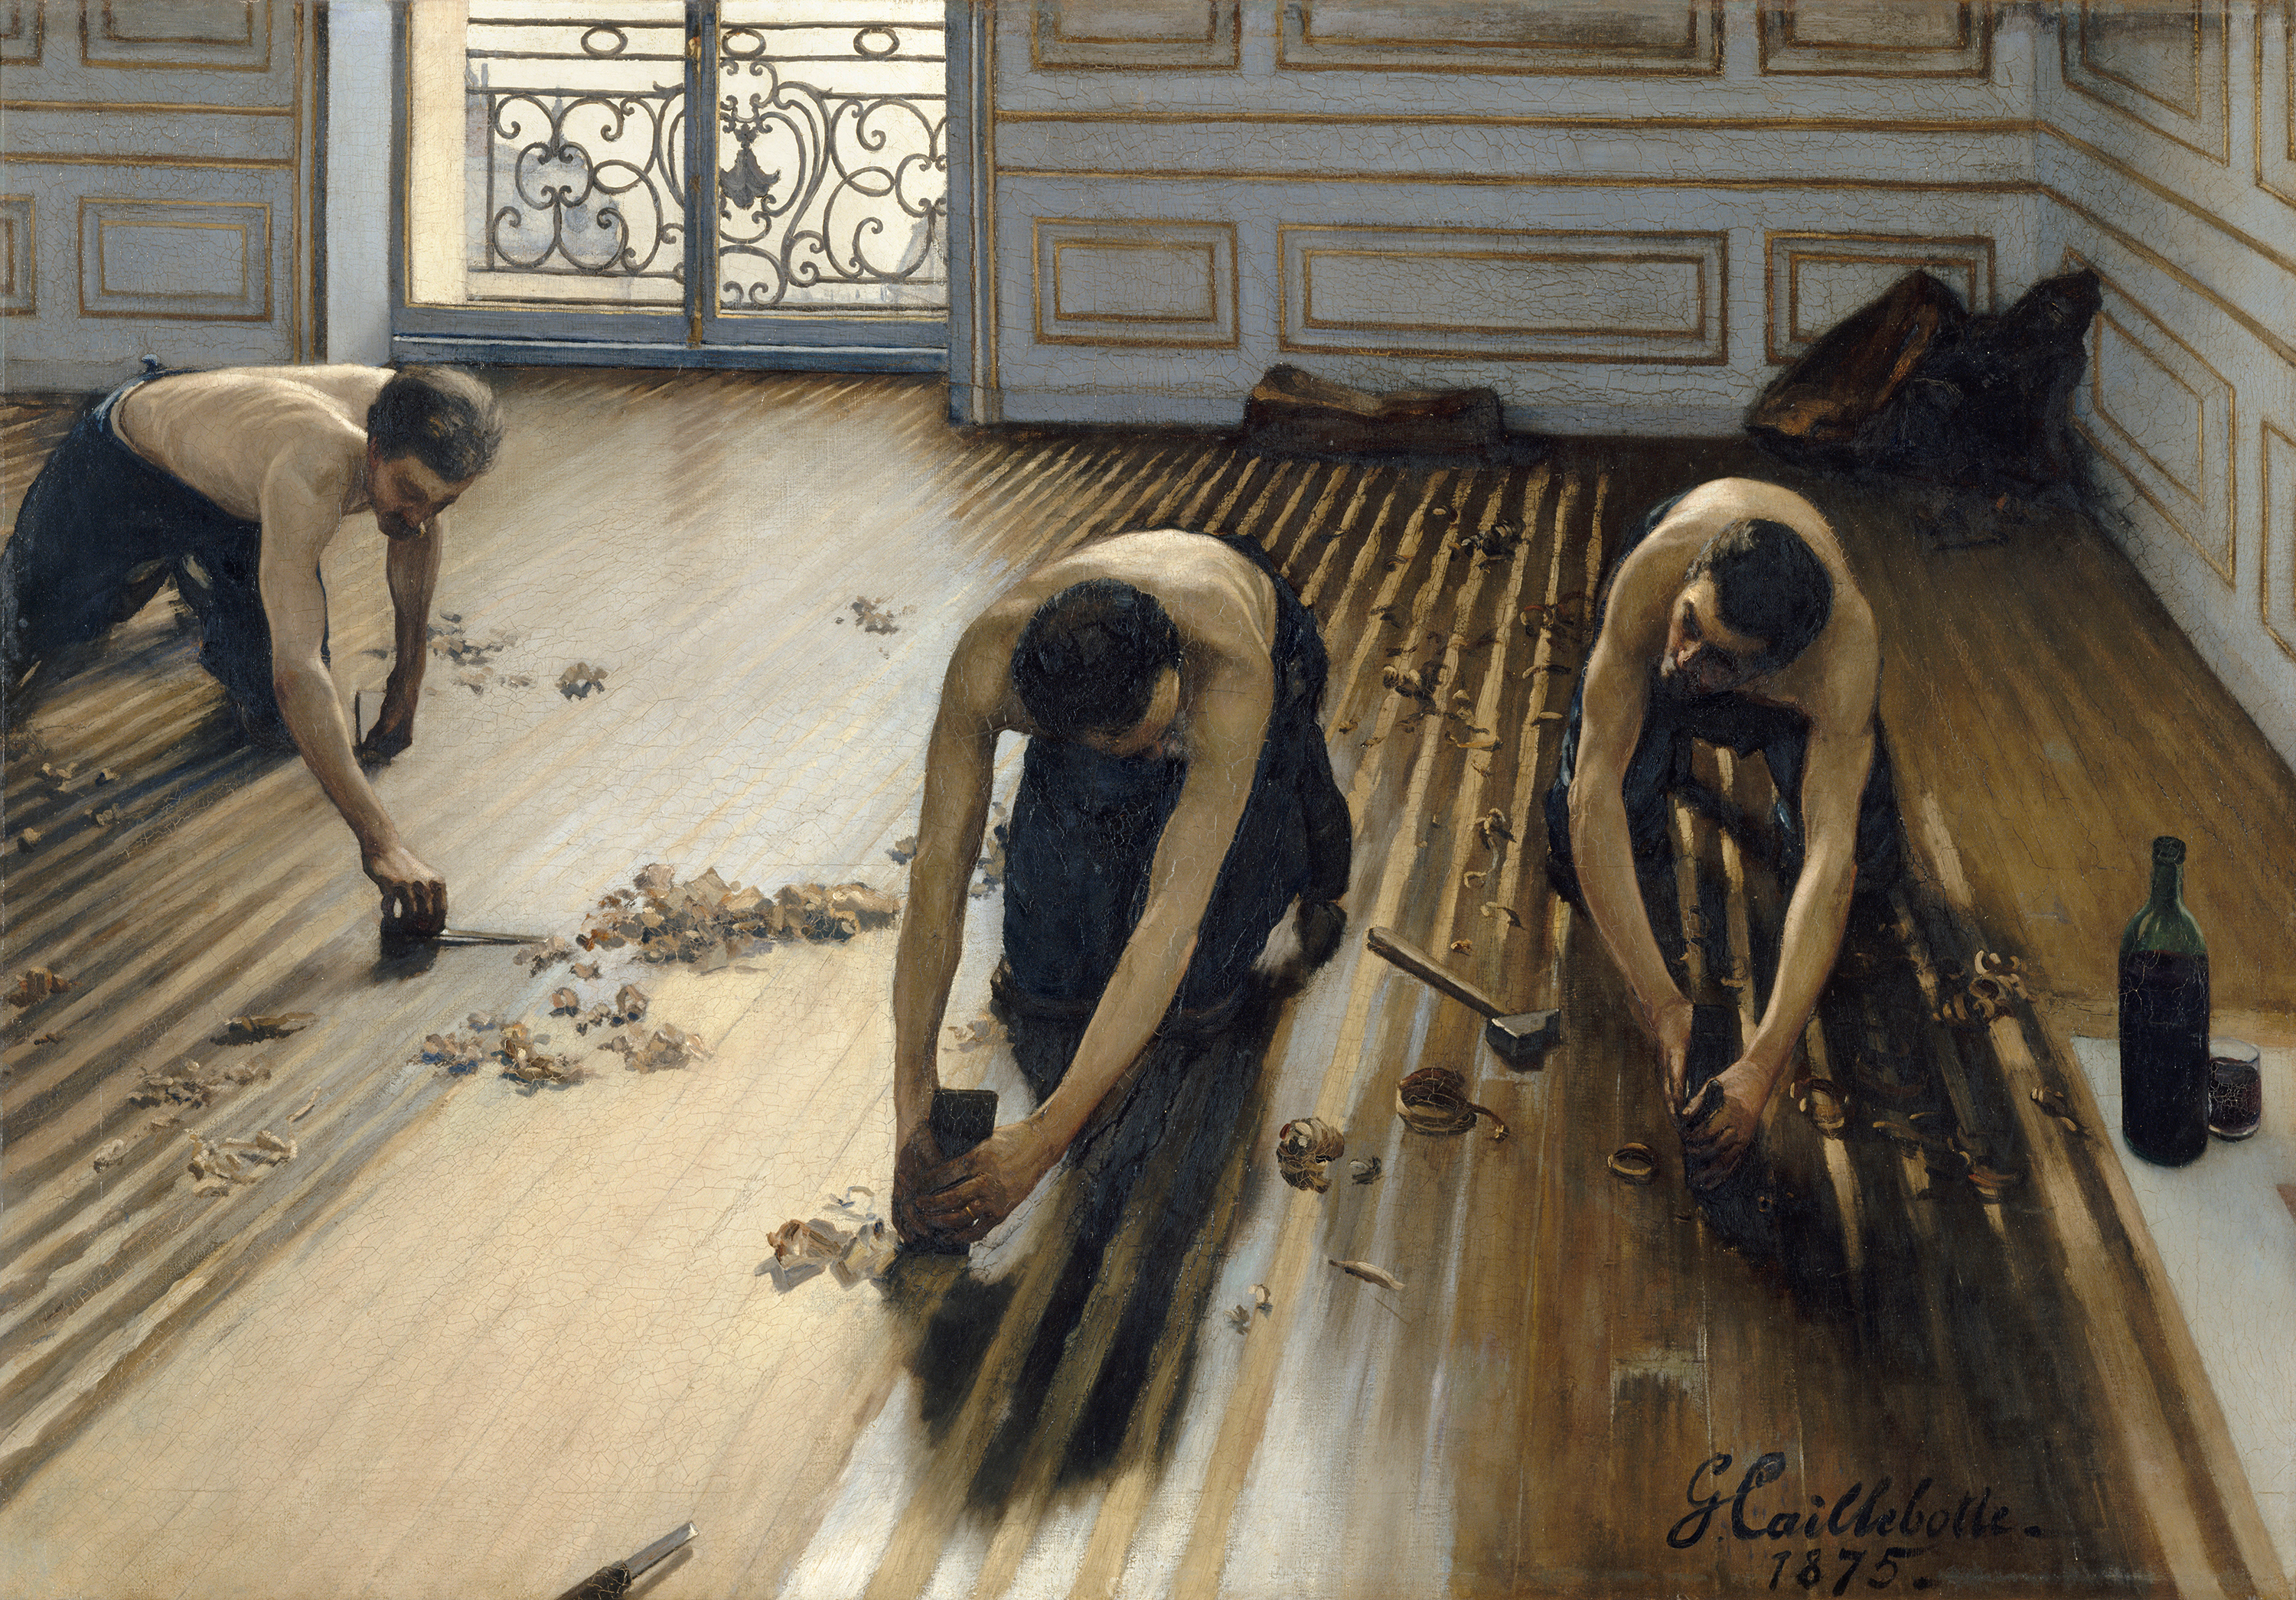 Three men kneel on a wood floor in a brightly lit room. They are scraping the wood of the floor, and curled wood shavings are around them.